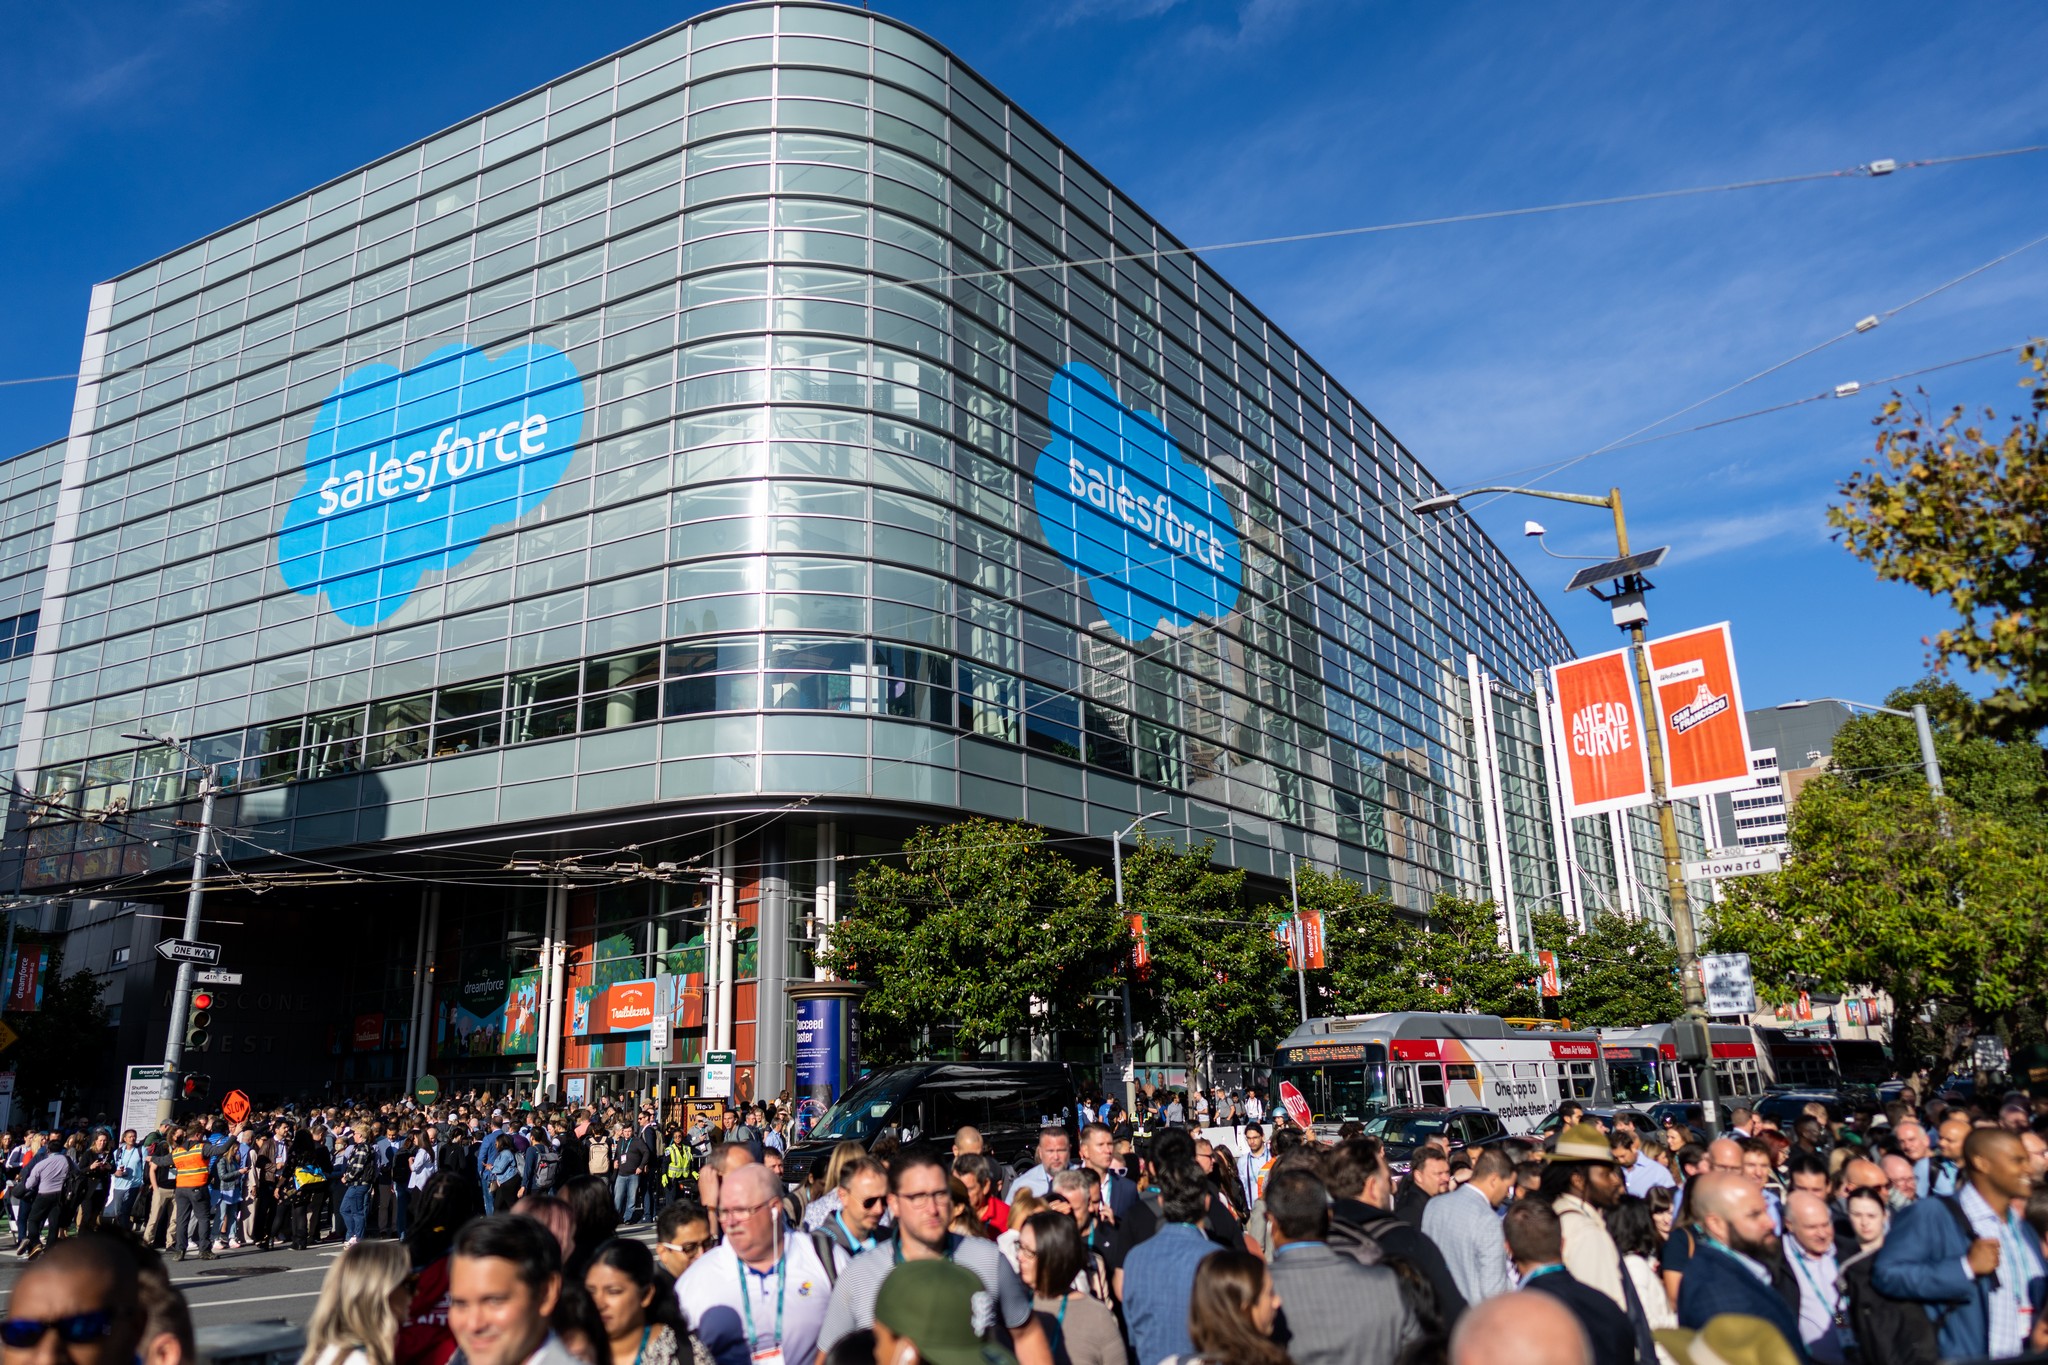 Dreamforce 2022, Salesforce.com's user and developer conference, is held at the Moscone Convention Center in San Francisco from September 20-22, 2022. (© Photo by Jakub Mosur Photography)